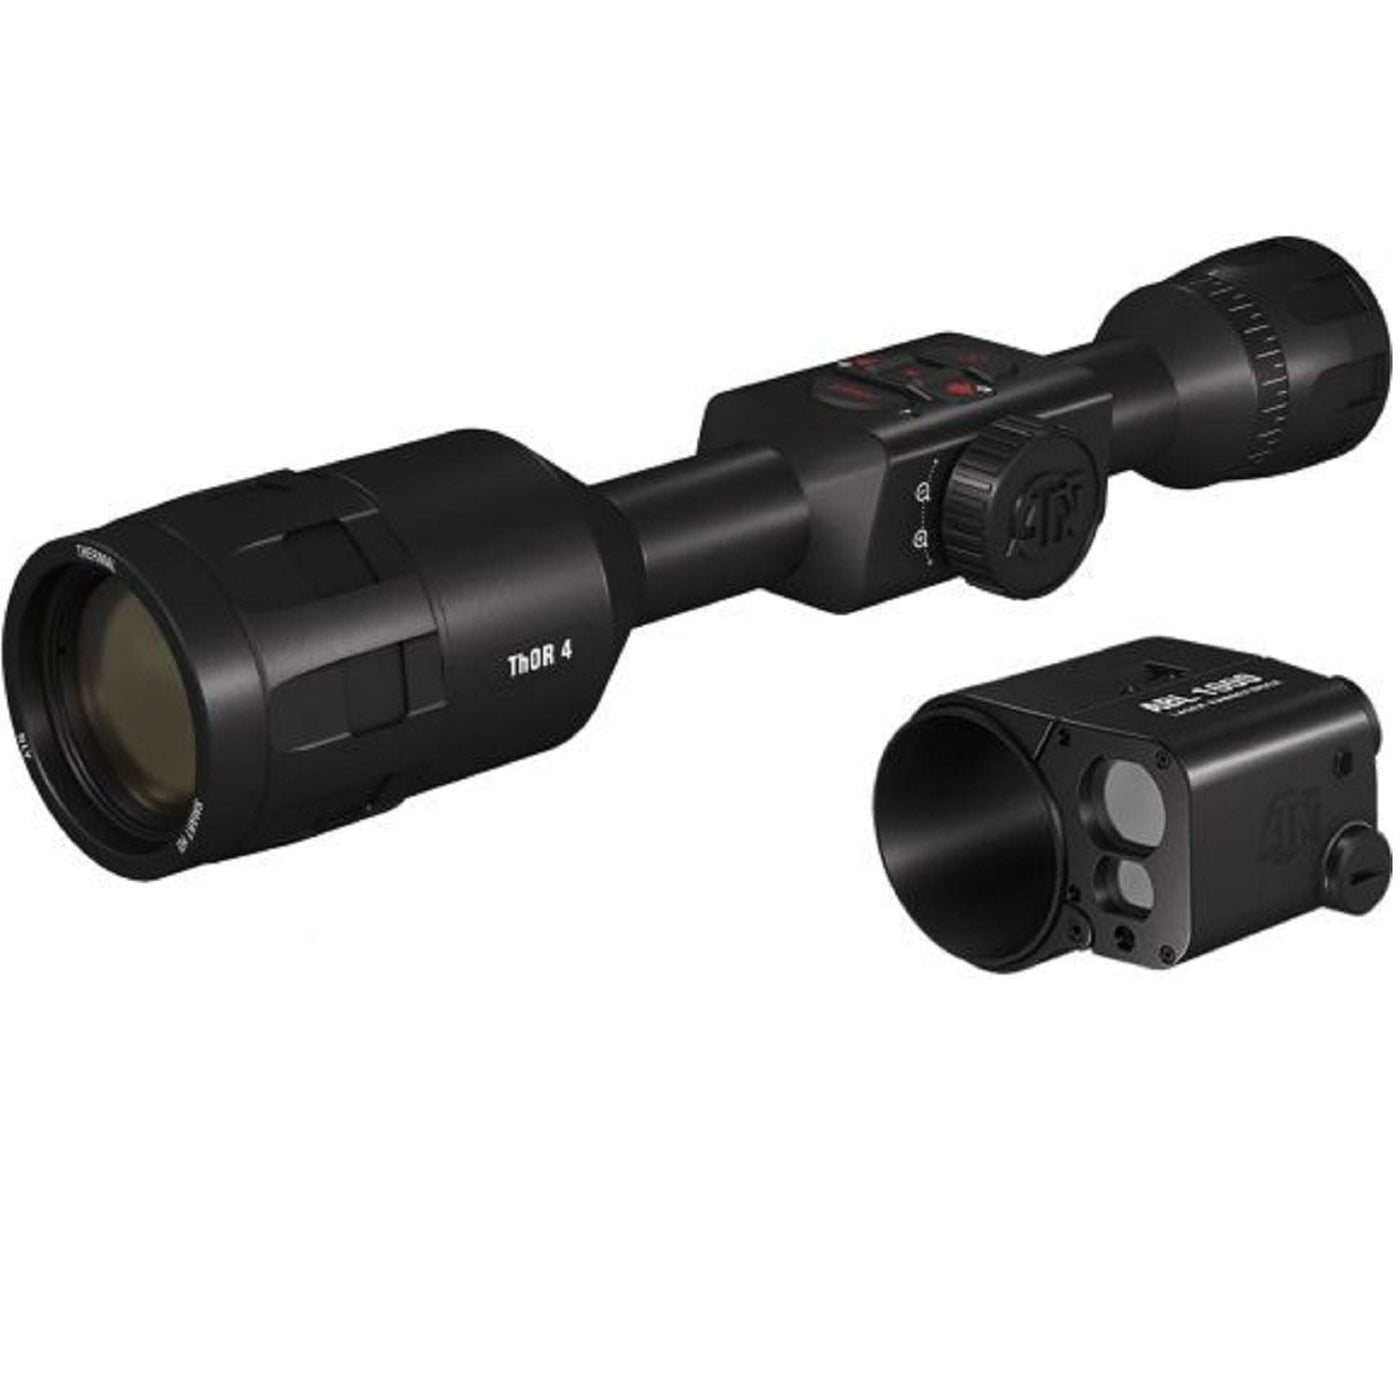 ATN ATN Thor 4 Thermal Rifle Scope and Video Rec 4.4-18x 384x288 Nightvision And Thermal